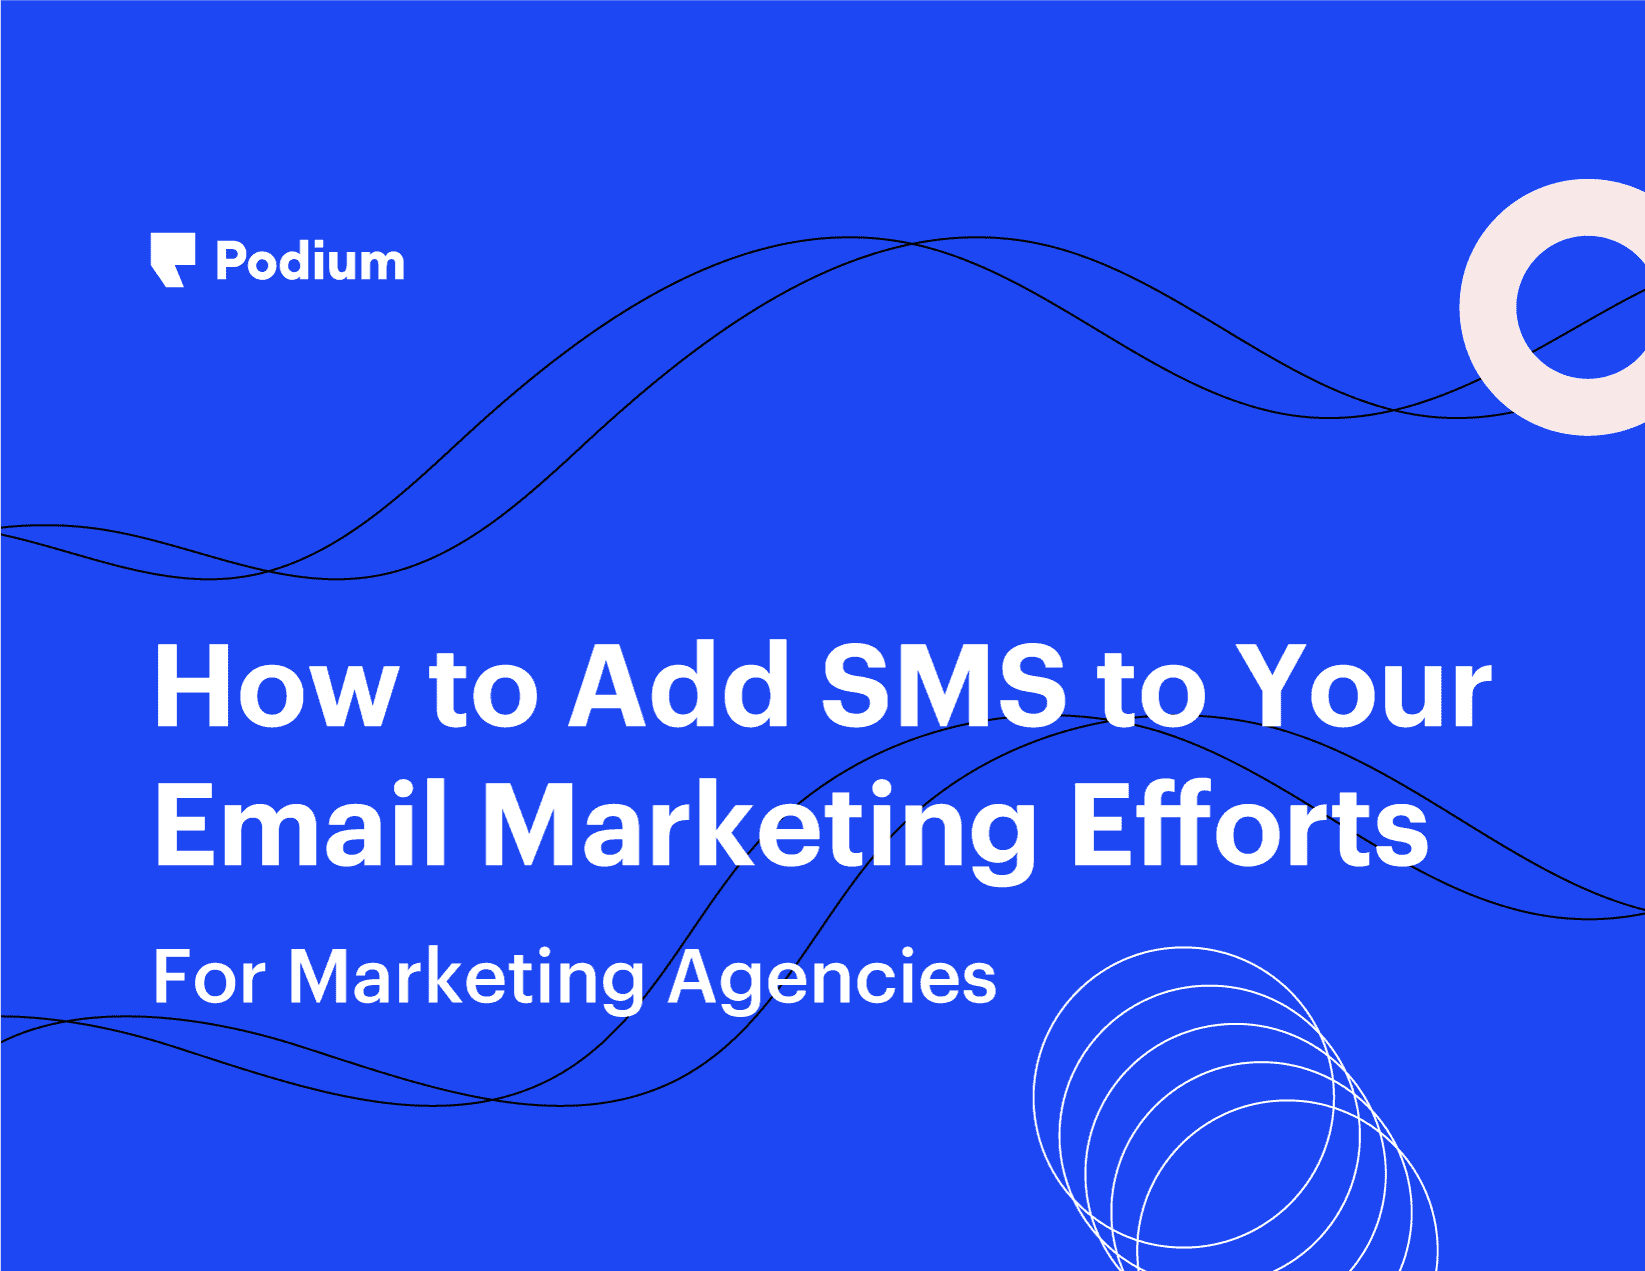 How to Add SMS to Your Email Marketing Efforts